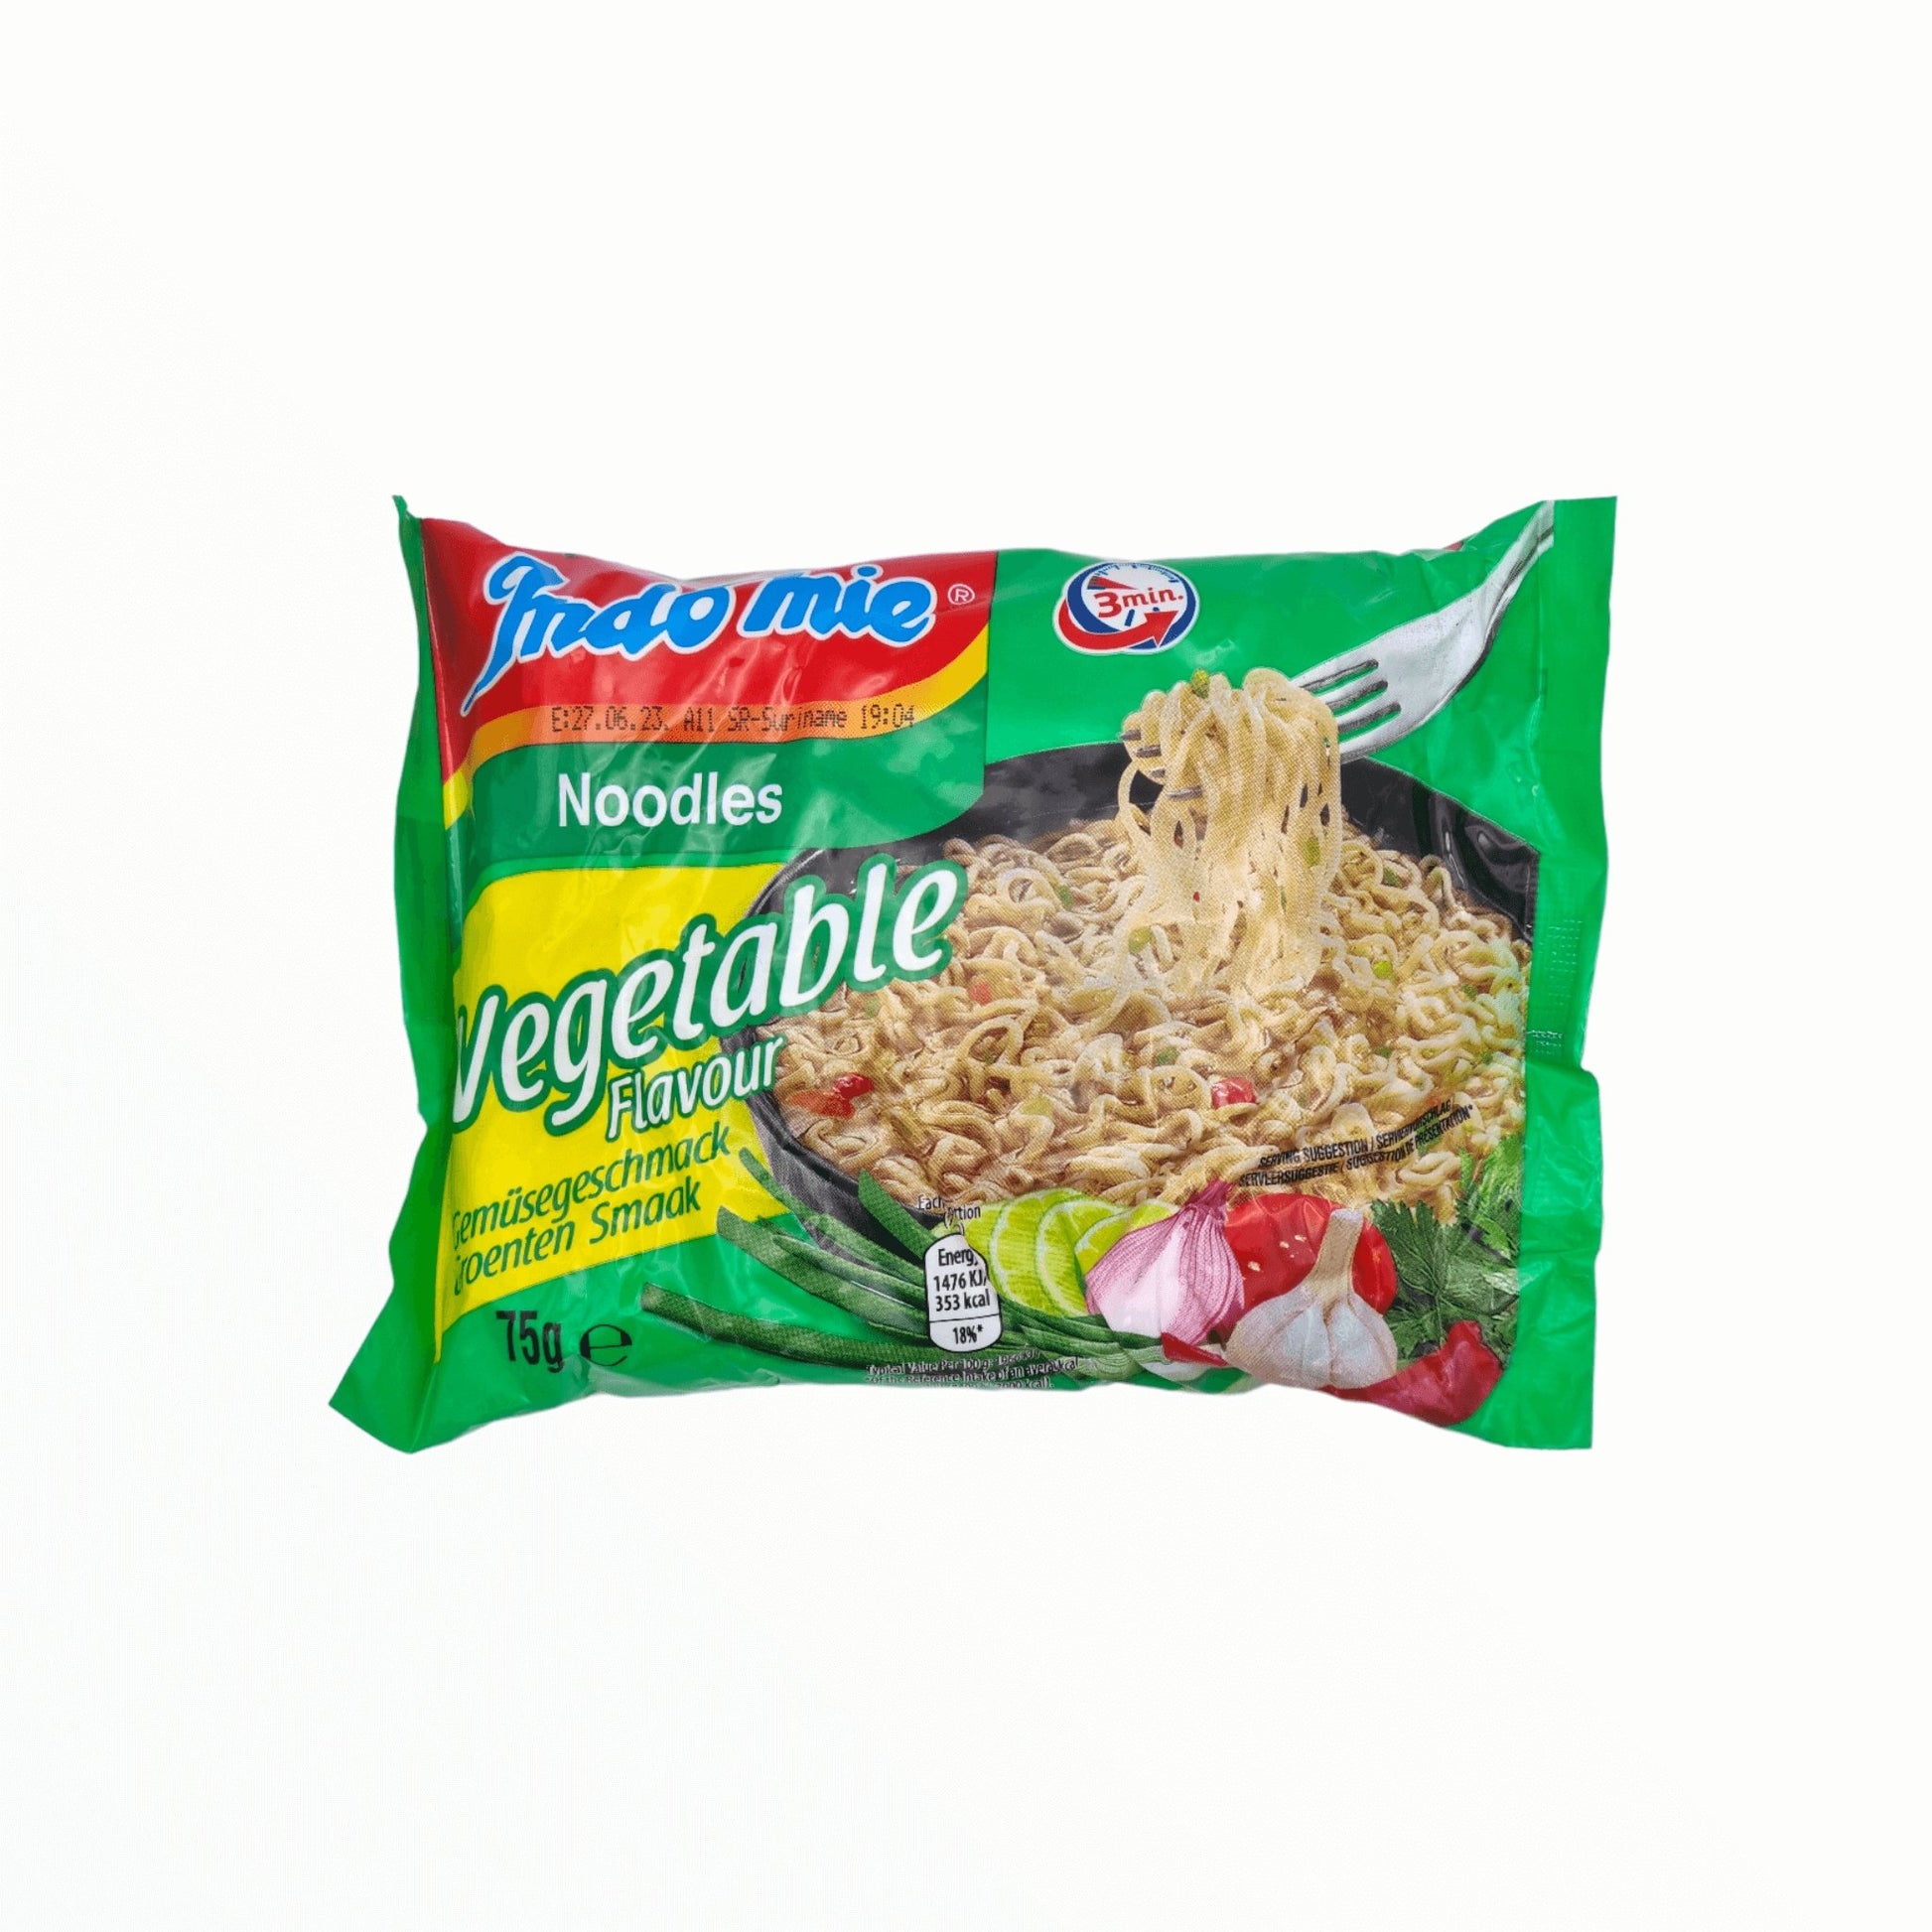 Instant Nudeln "Vegetable" 75g - Mabuhay Pinoy Asia Shop